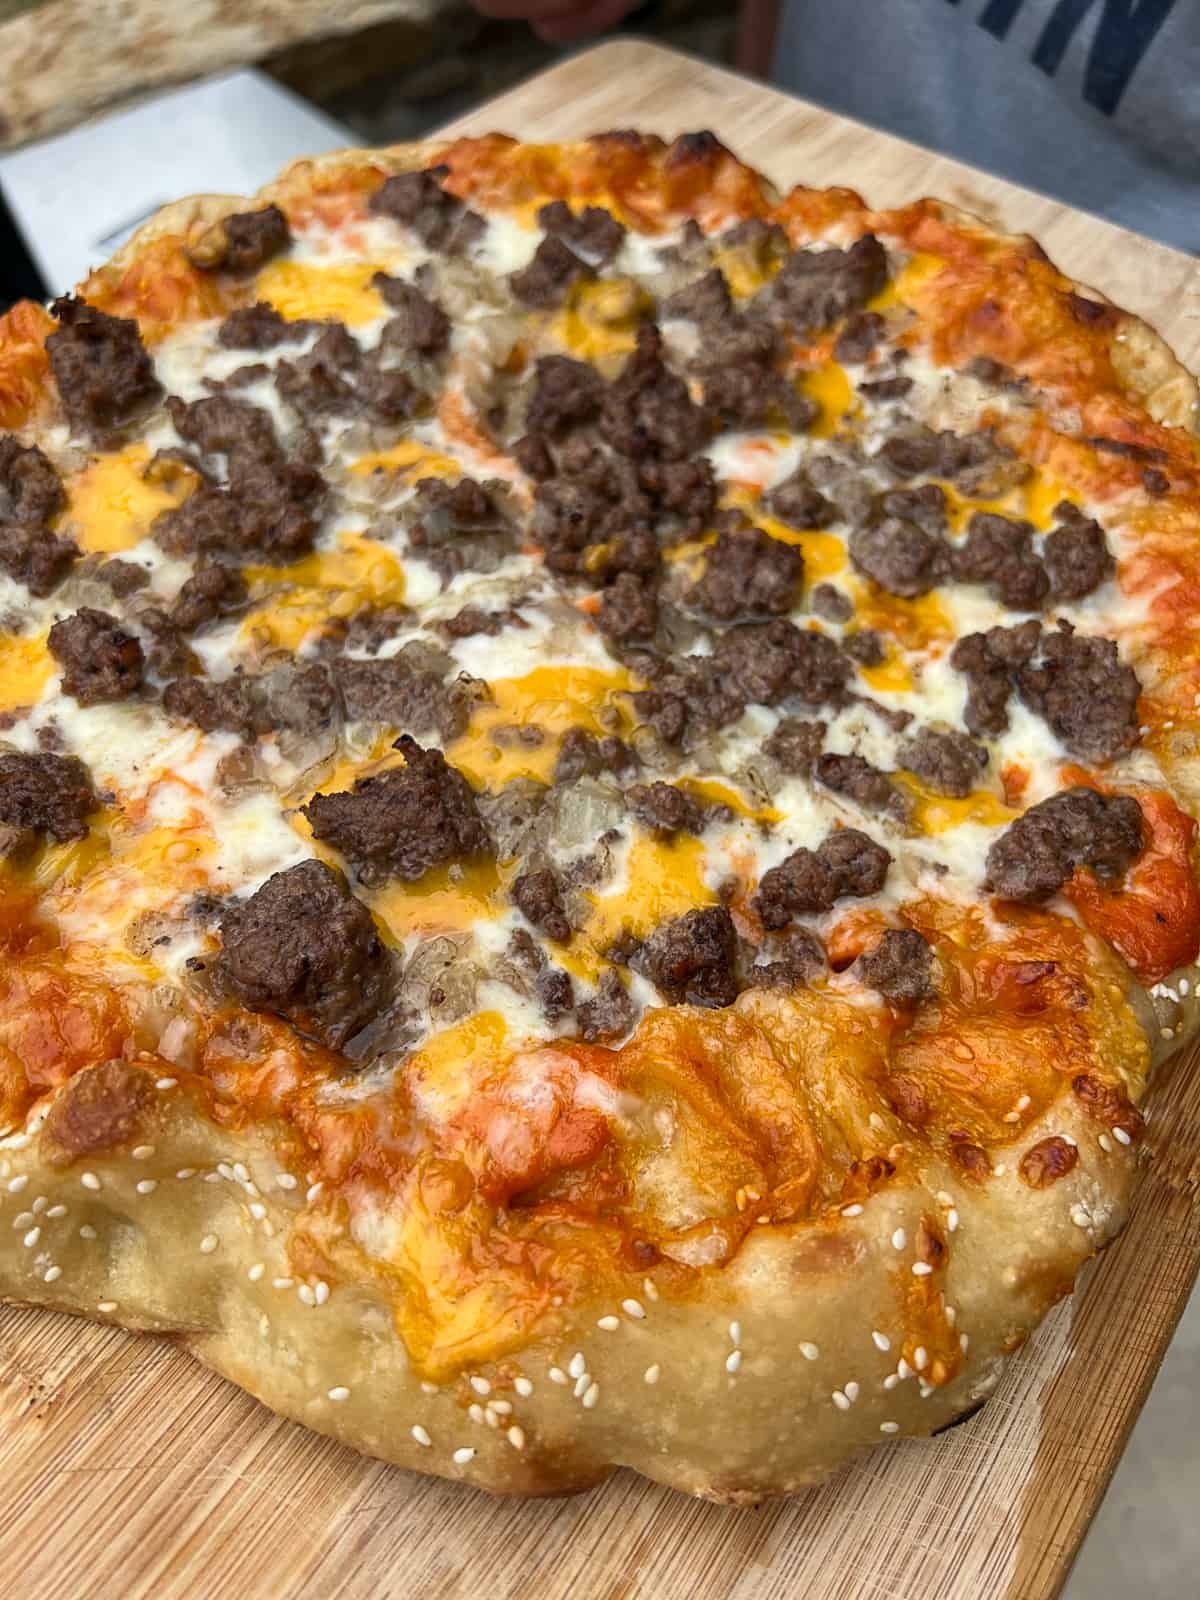 Cheeseburger Pizza Recipe With Mustard Pickles and Sesame seed crust